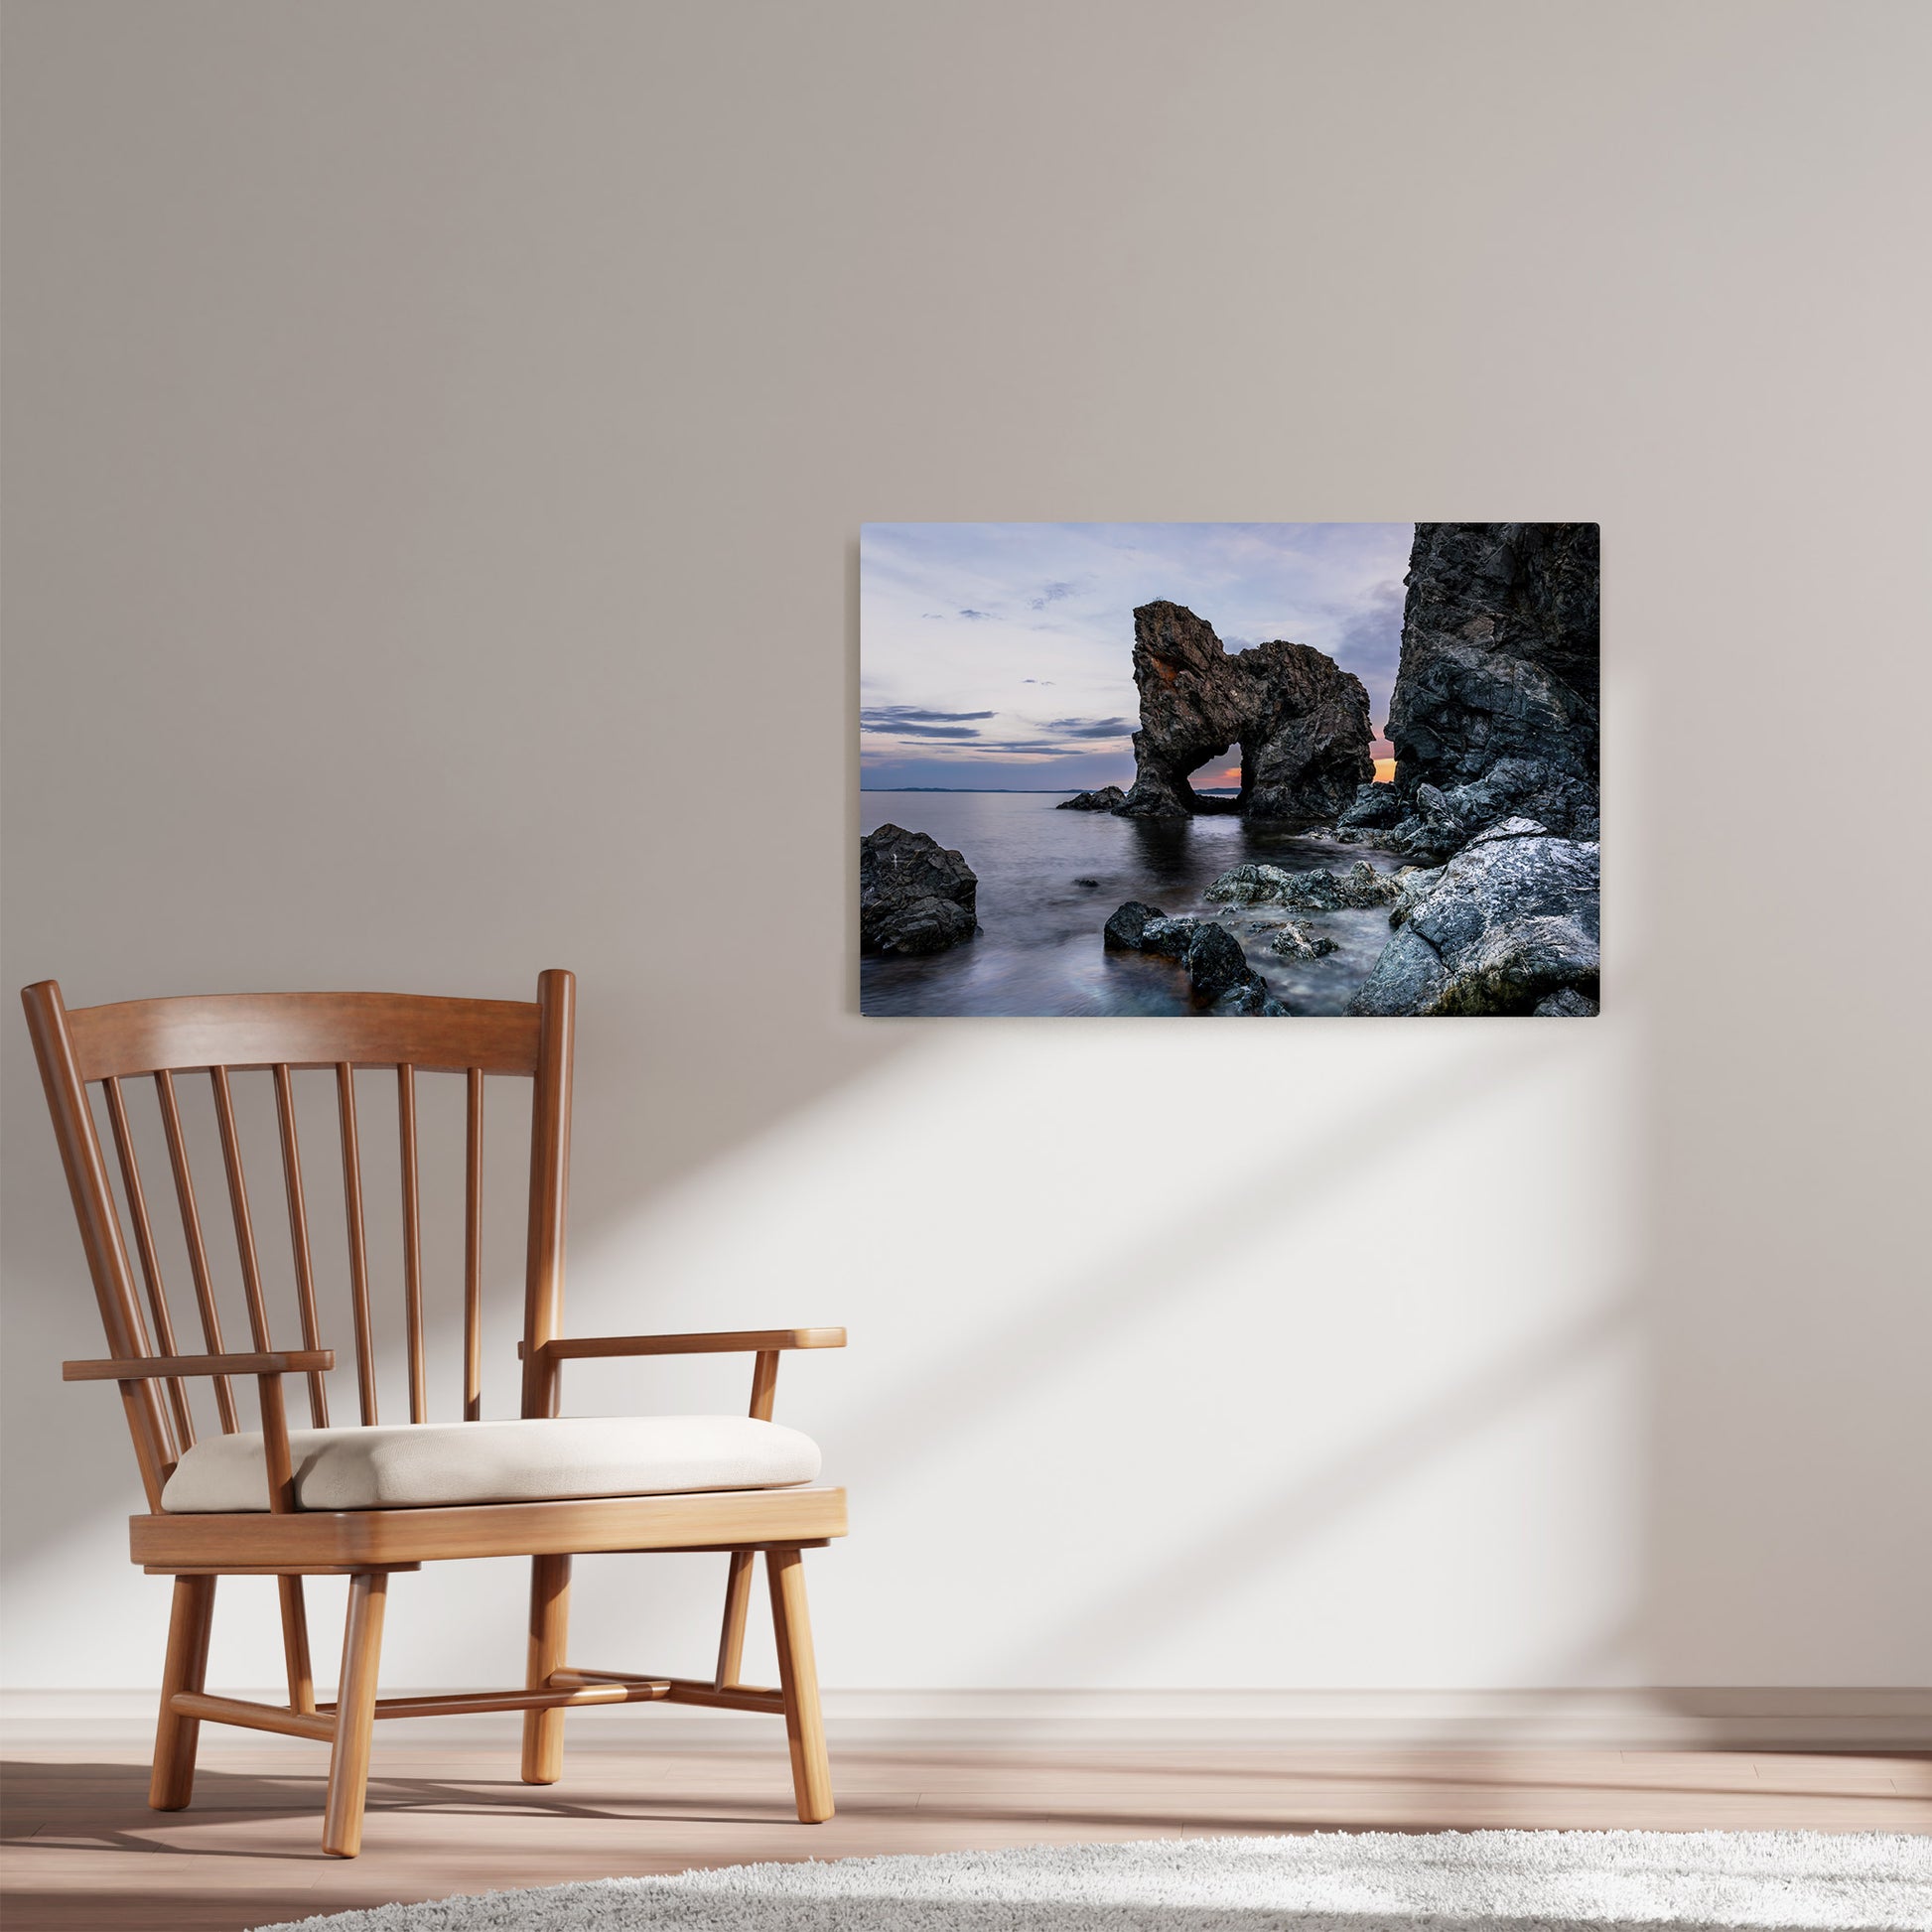 Ray Mackey's Nippers Harbour Lion photography reproduced on HD metal print and displayed on wall